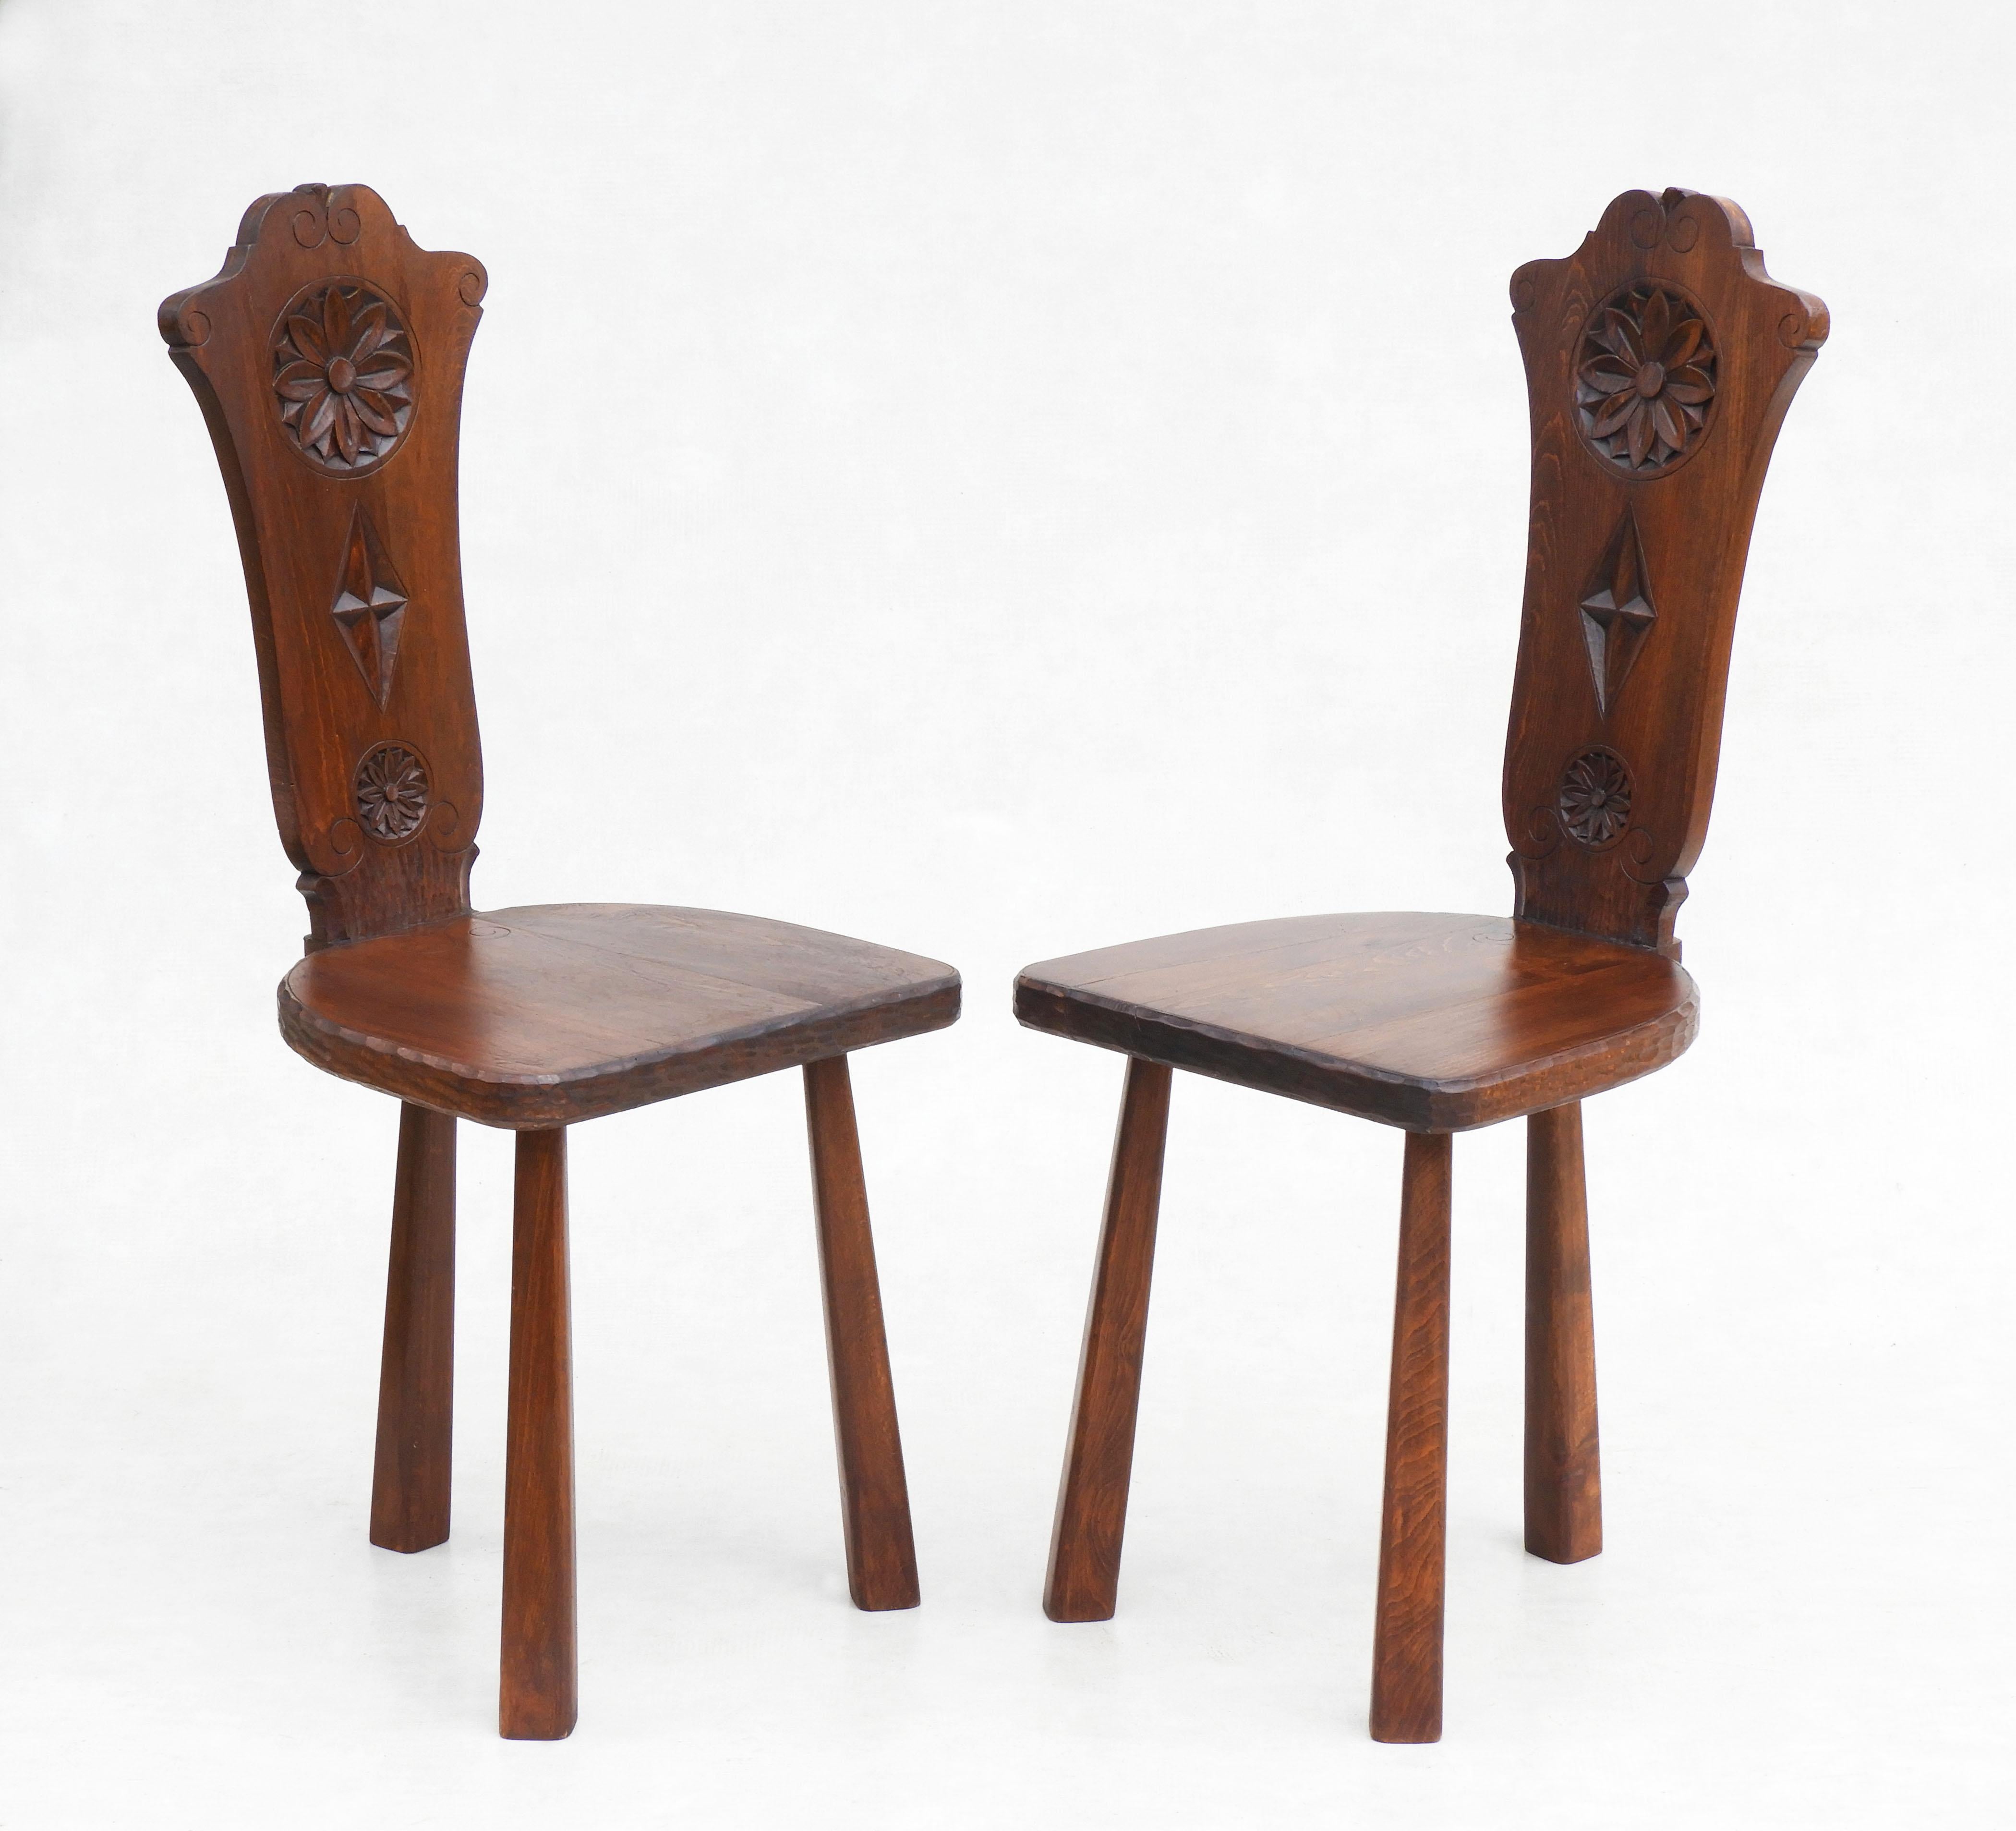 Carved Pair of Basque Tripod Chairs 1950s European Folk Art For Sale